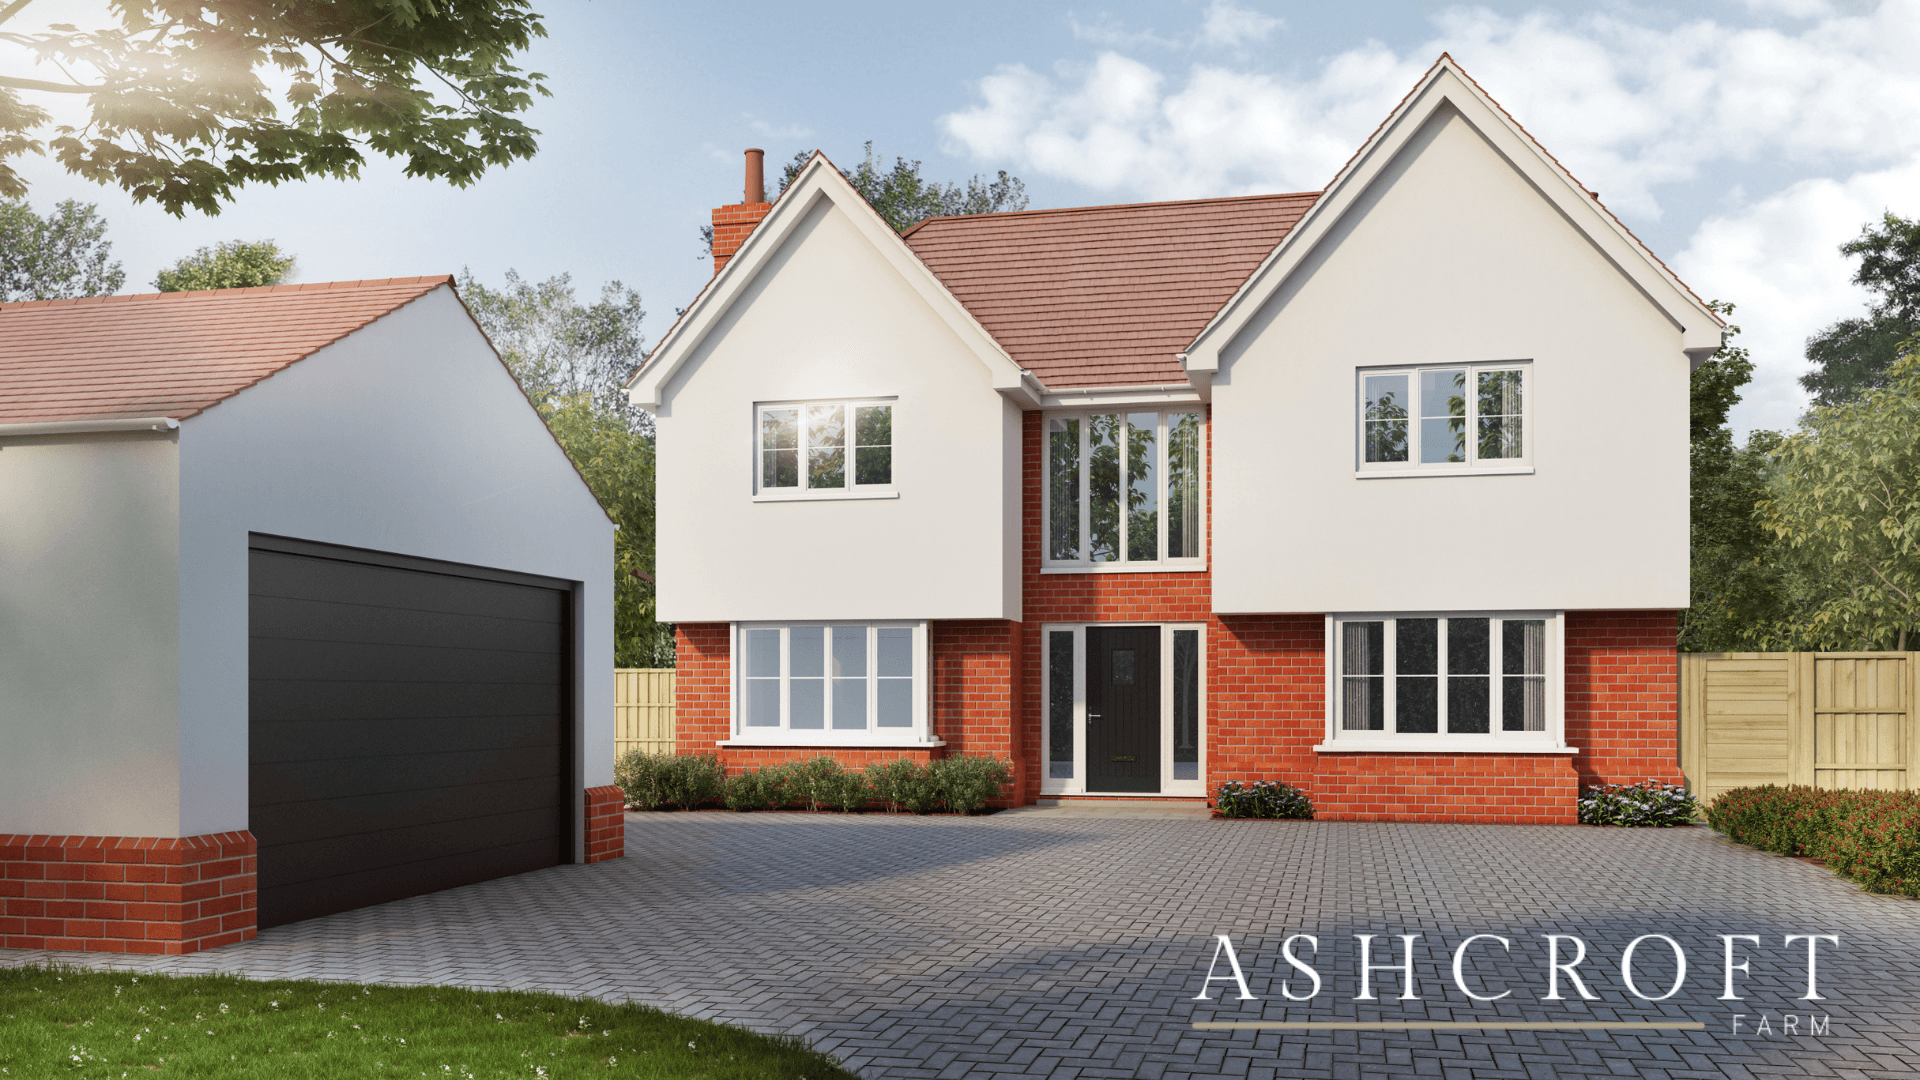 BESPOKE NEW DEVELOPMENT OF JUST 8 HOUSES LOCATED IN THE PICTURESQUE VILLAGE OF LITTLE HADHAM